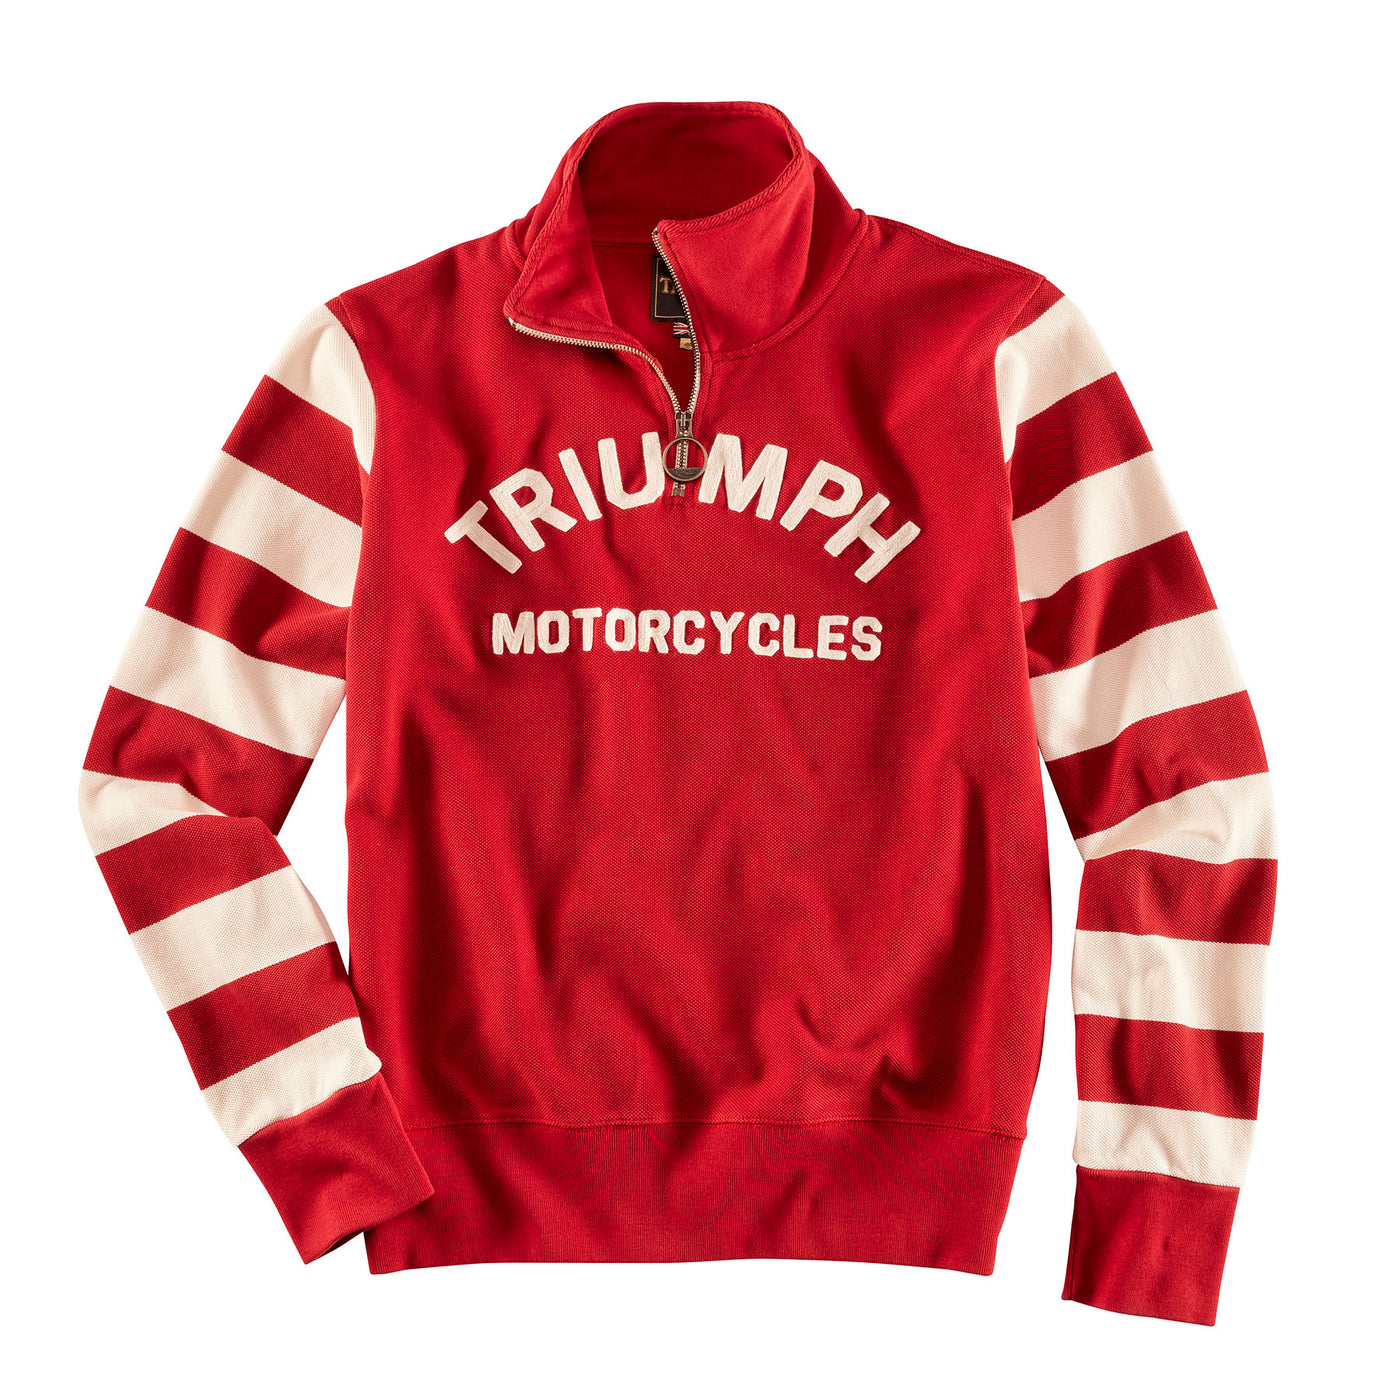 Triumph Motorcycles Sweater Highly Red